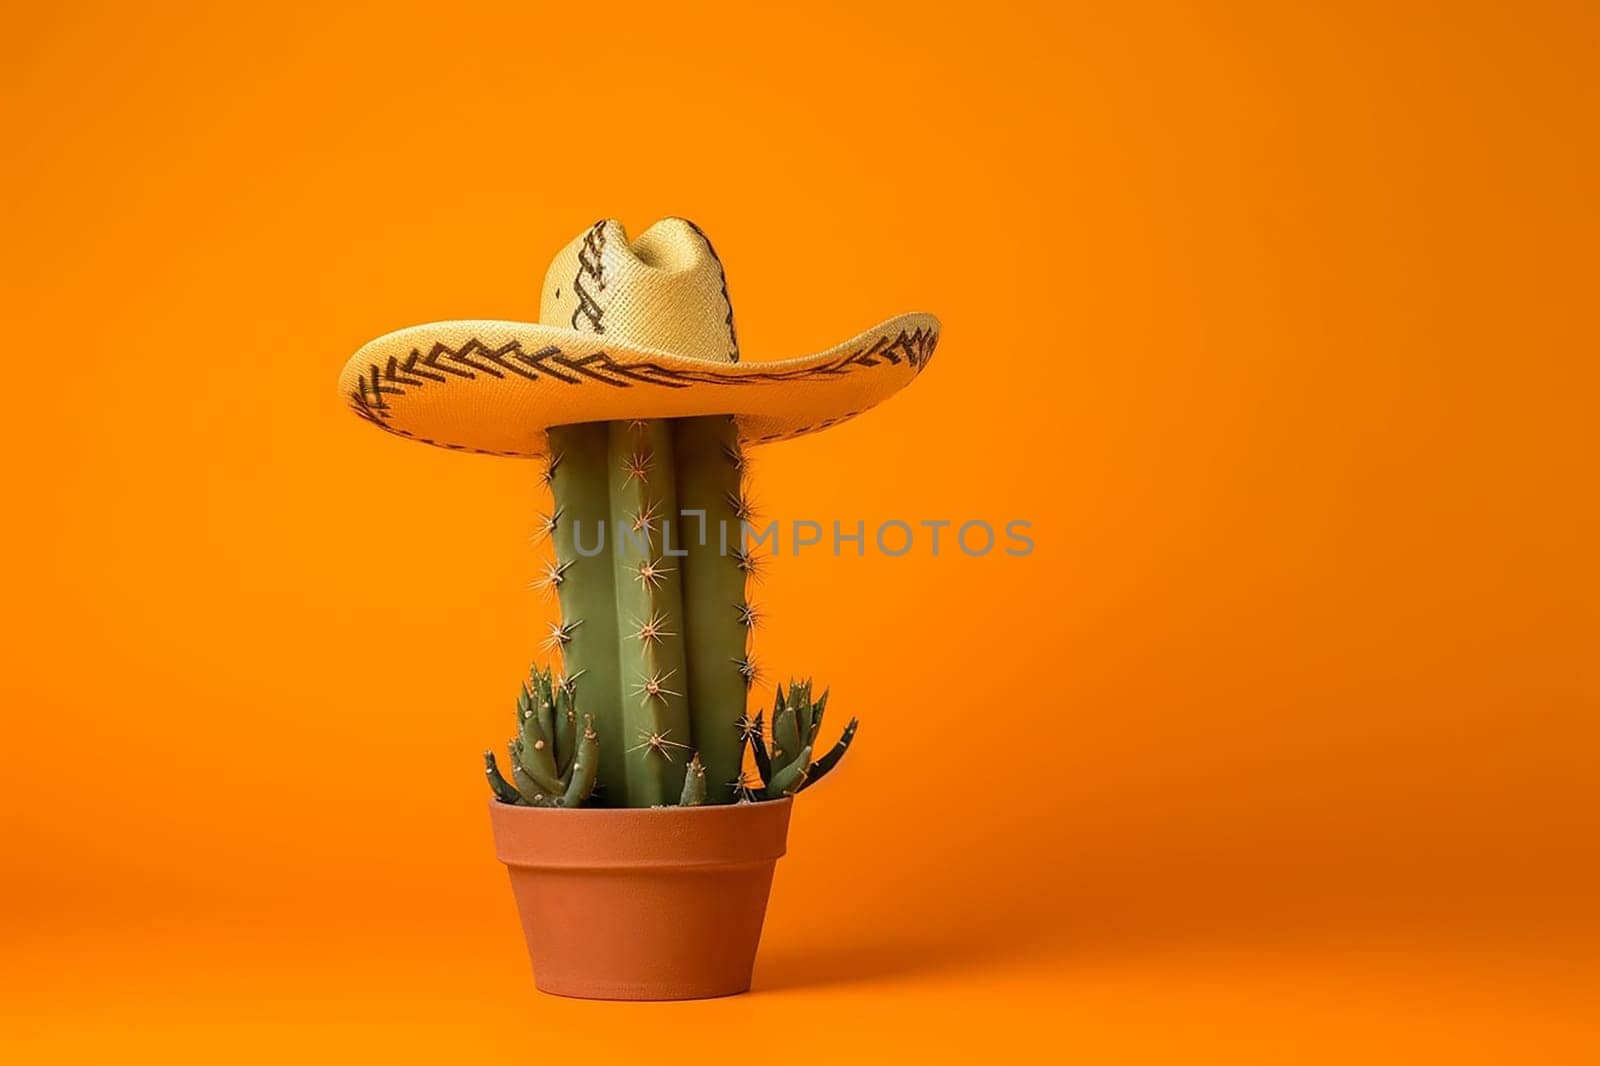 Cactus wearing sombrero against orange background. by Hype2art